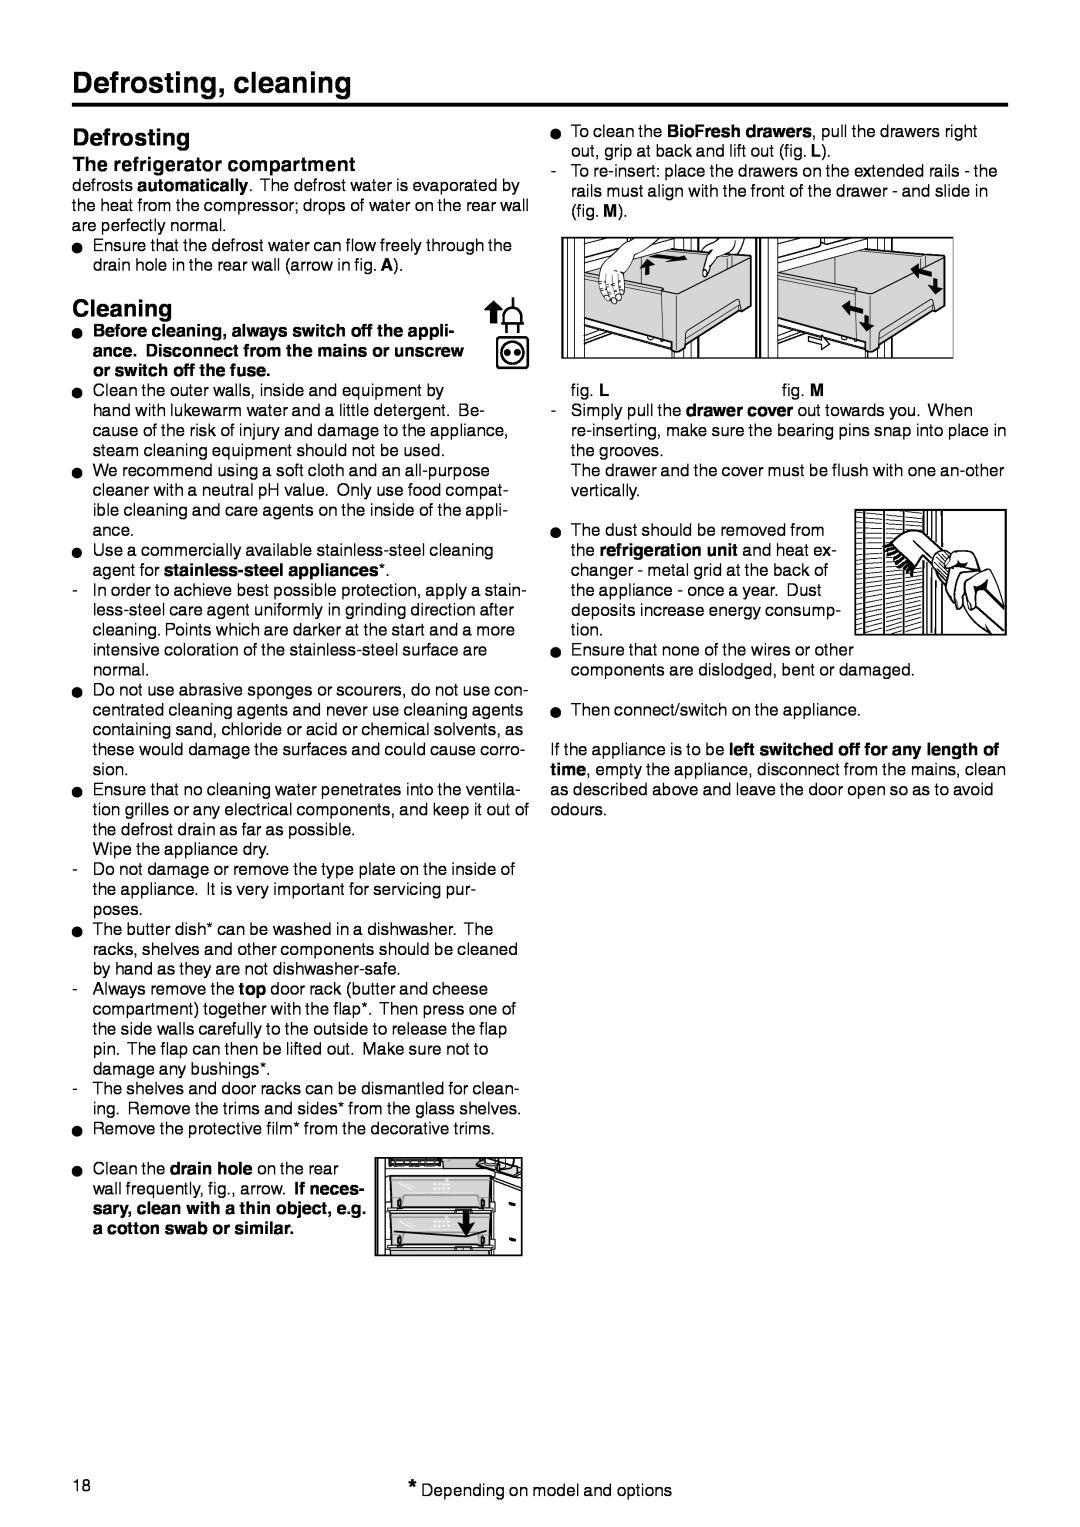 Liebherr 7082 212-02 manual Defrosting, cleaning, Cleaning, The refrigerator compartment 